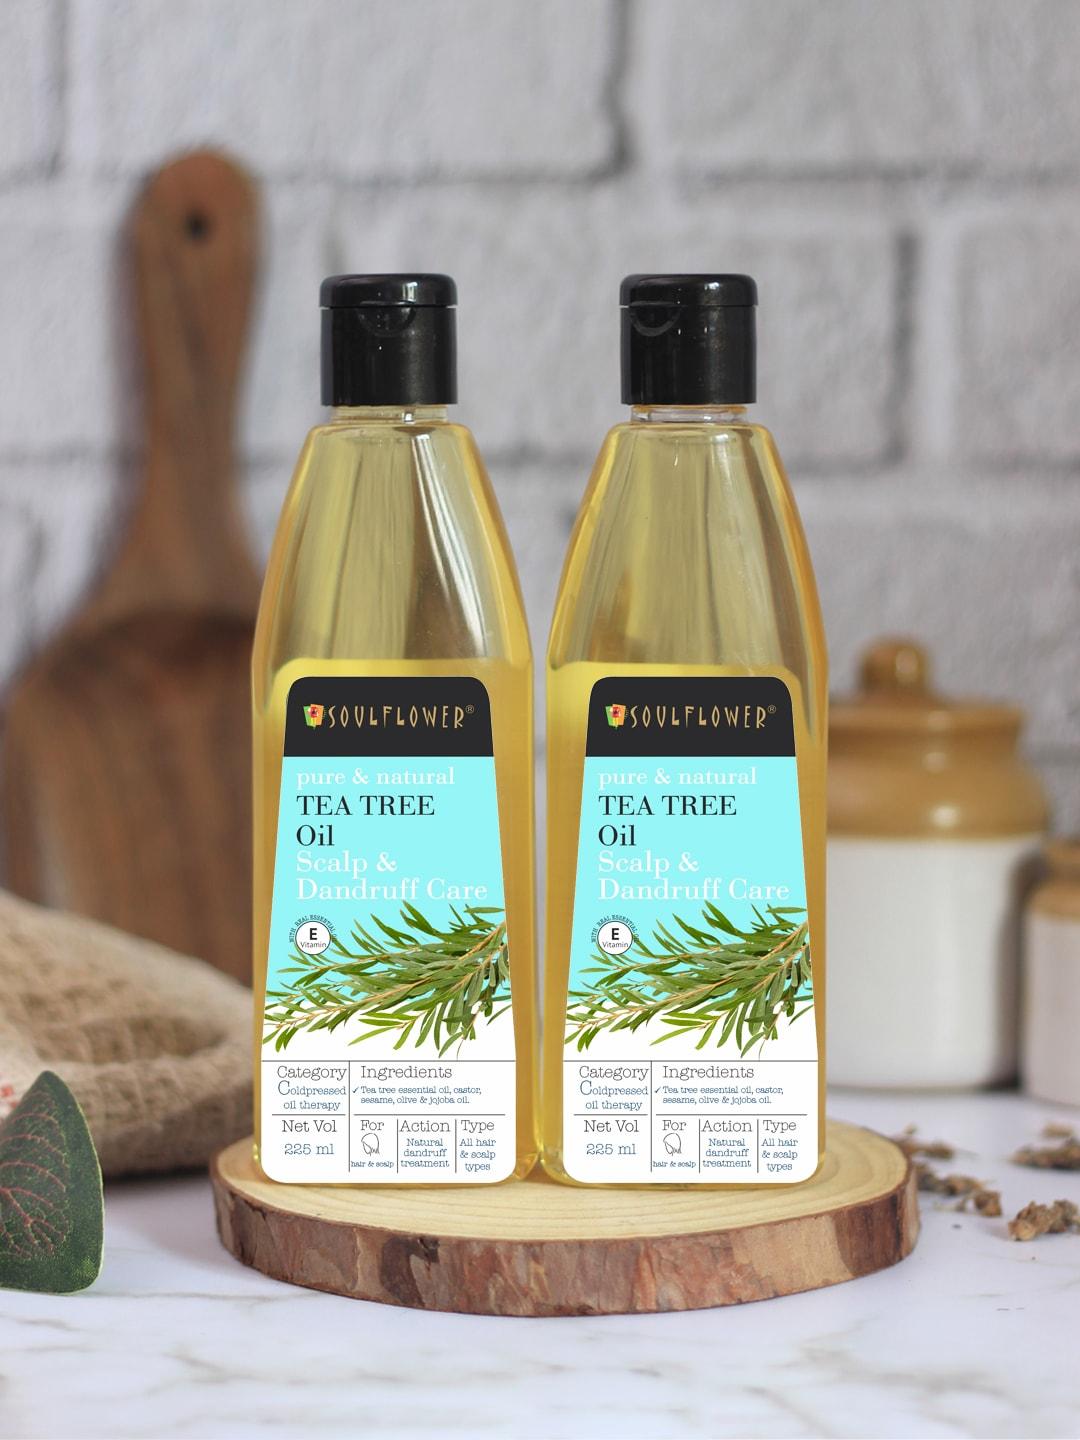 Soulflower 2 Pc Tea Tree Hair Oil - Dandruff Control 100% Natural Cold Pressed 225 ml each